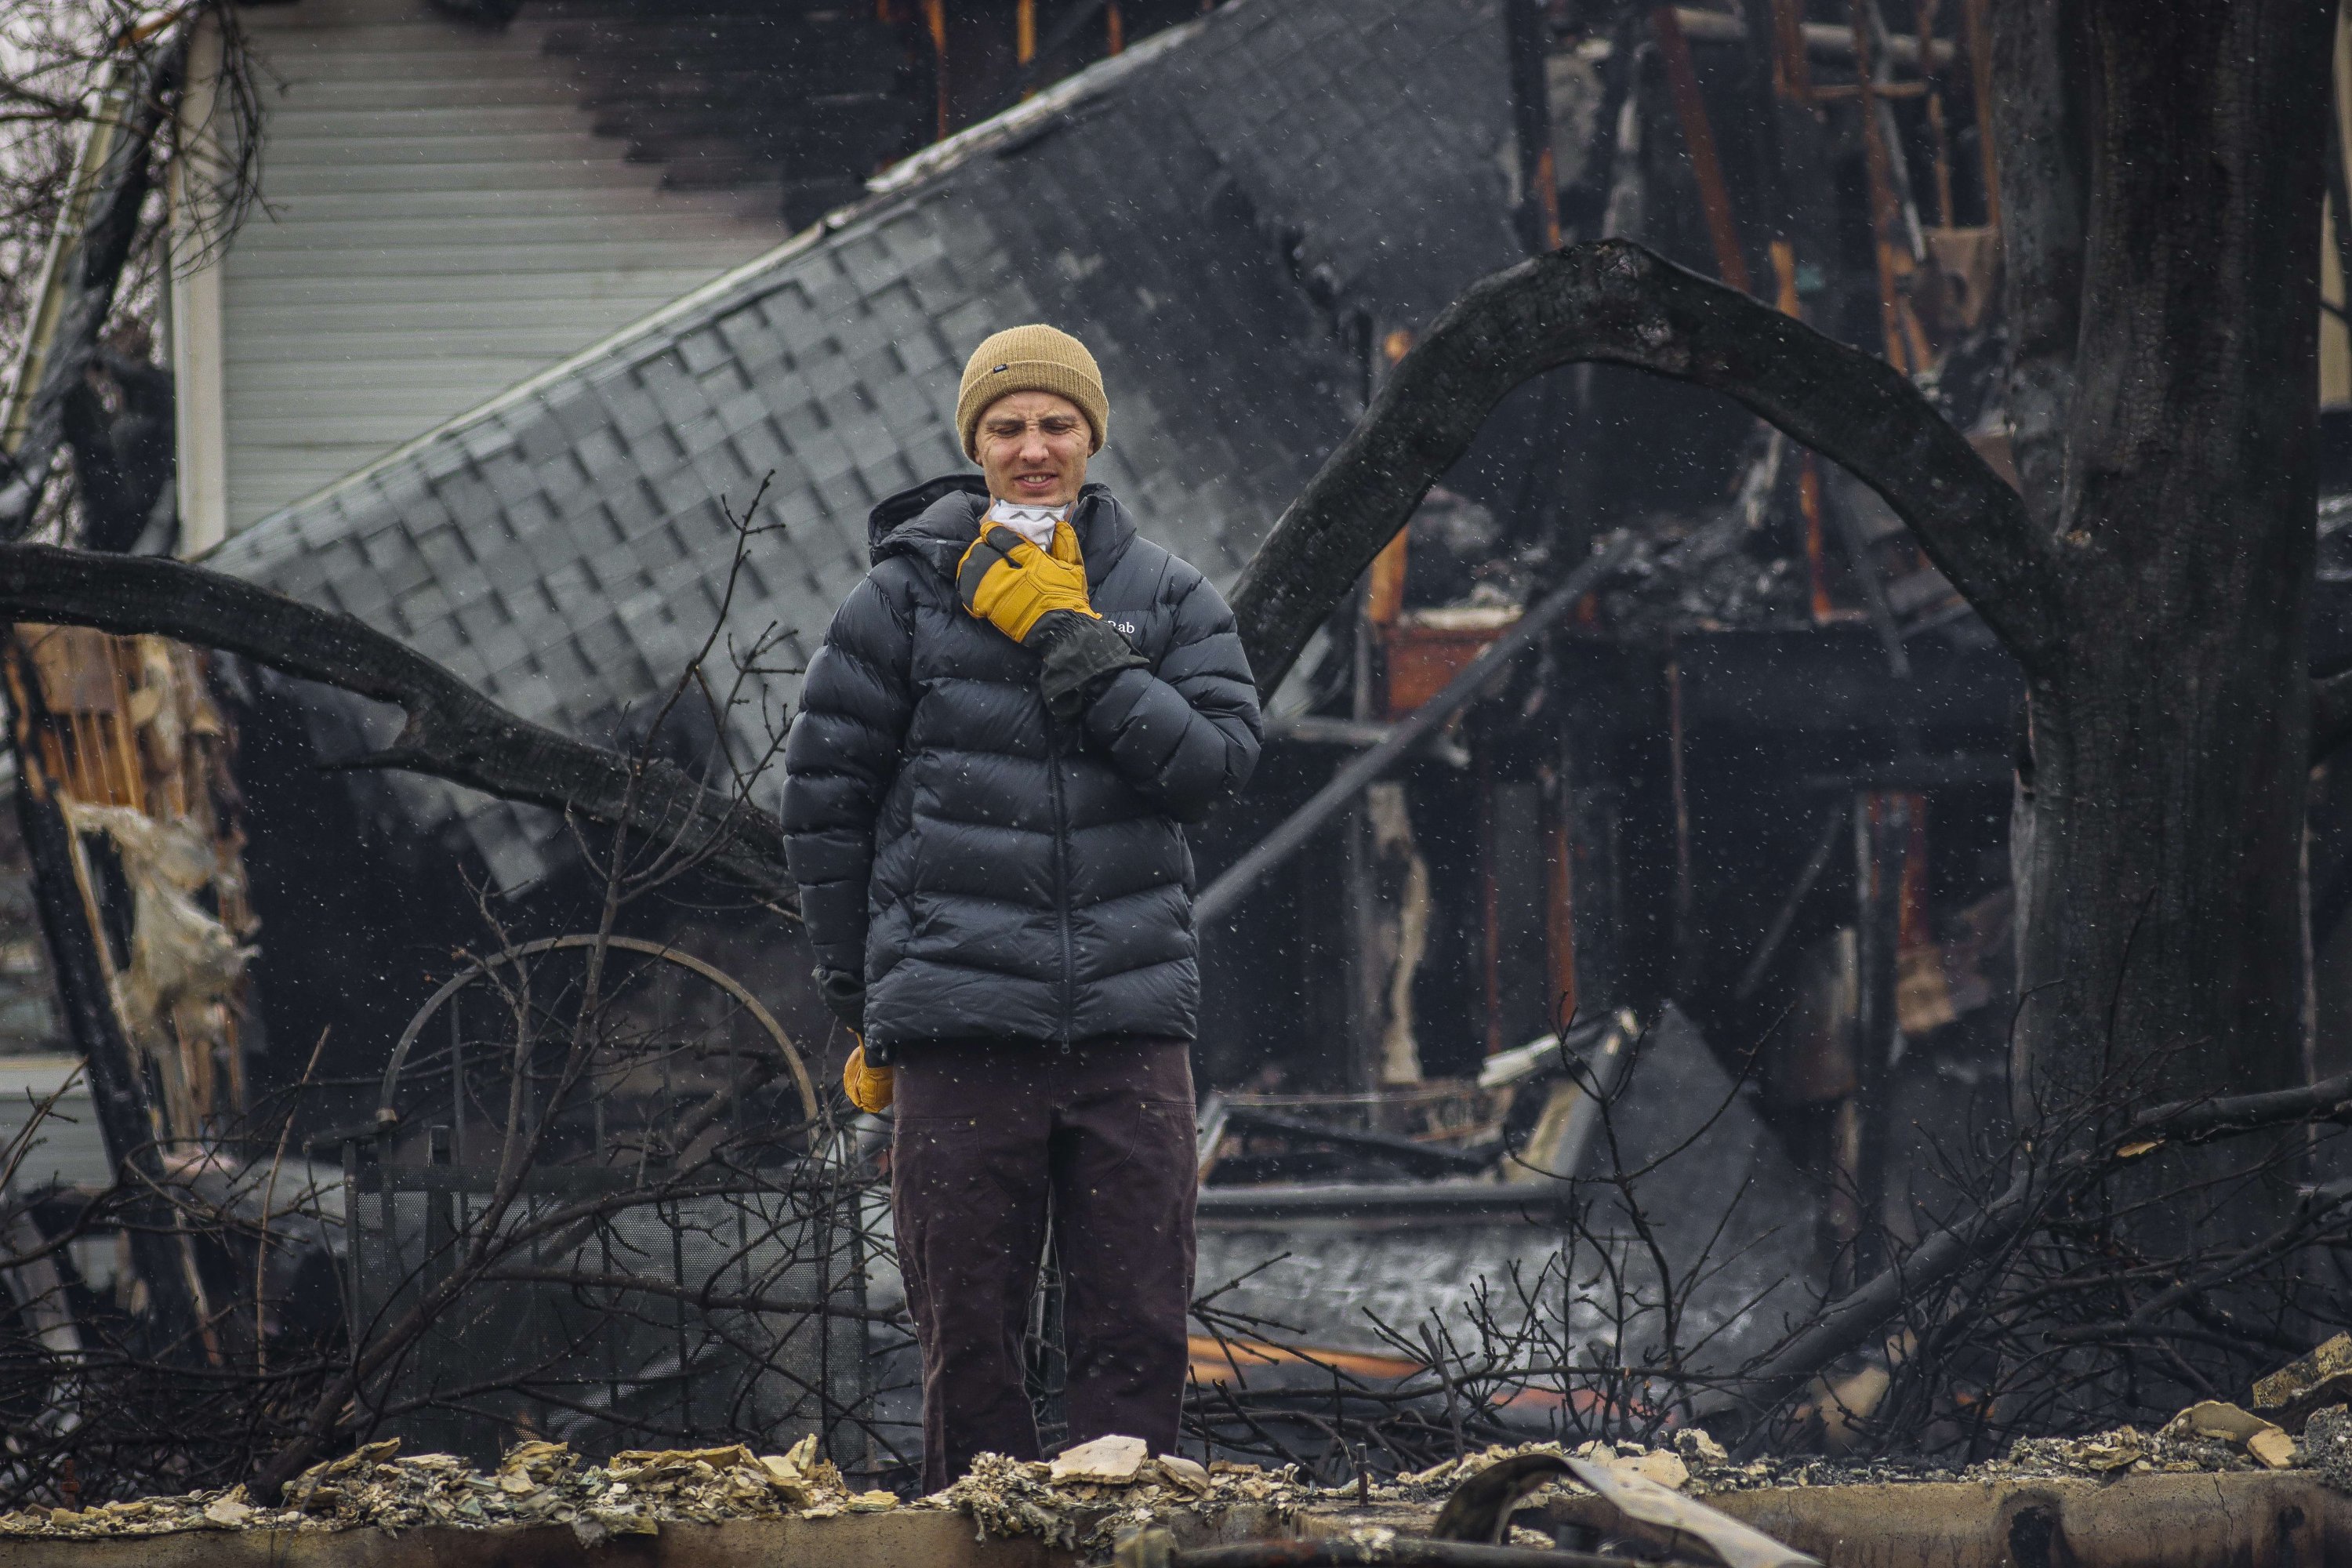 Talis Ozols takes in what remains of his apartment at the Wildflower Condos in the aftermath of the Marshall Fire, Colorado, U.S., on Dec. 31, 2021. (Getty Images/AFP Photo)